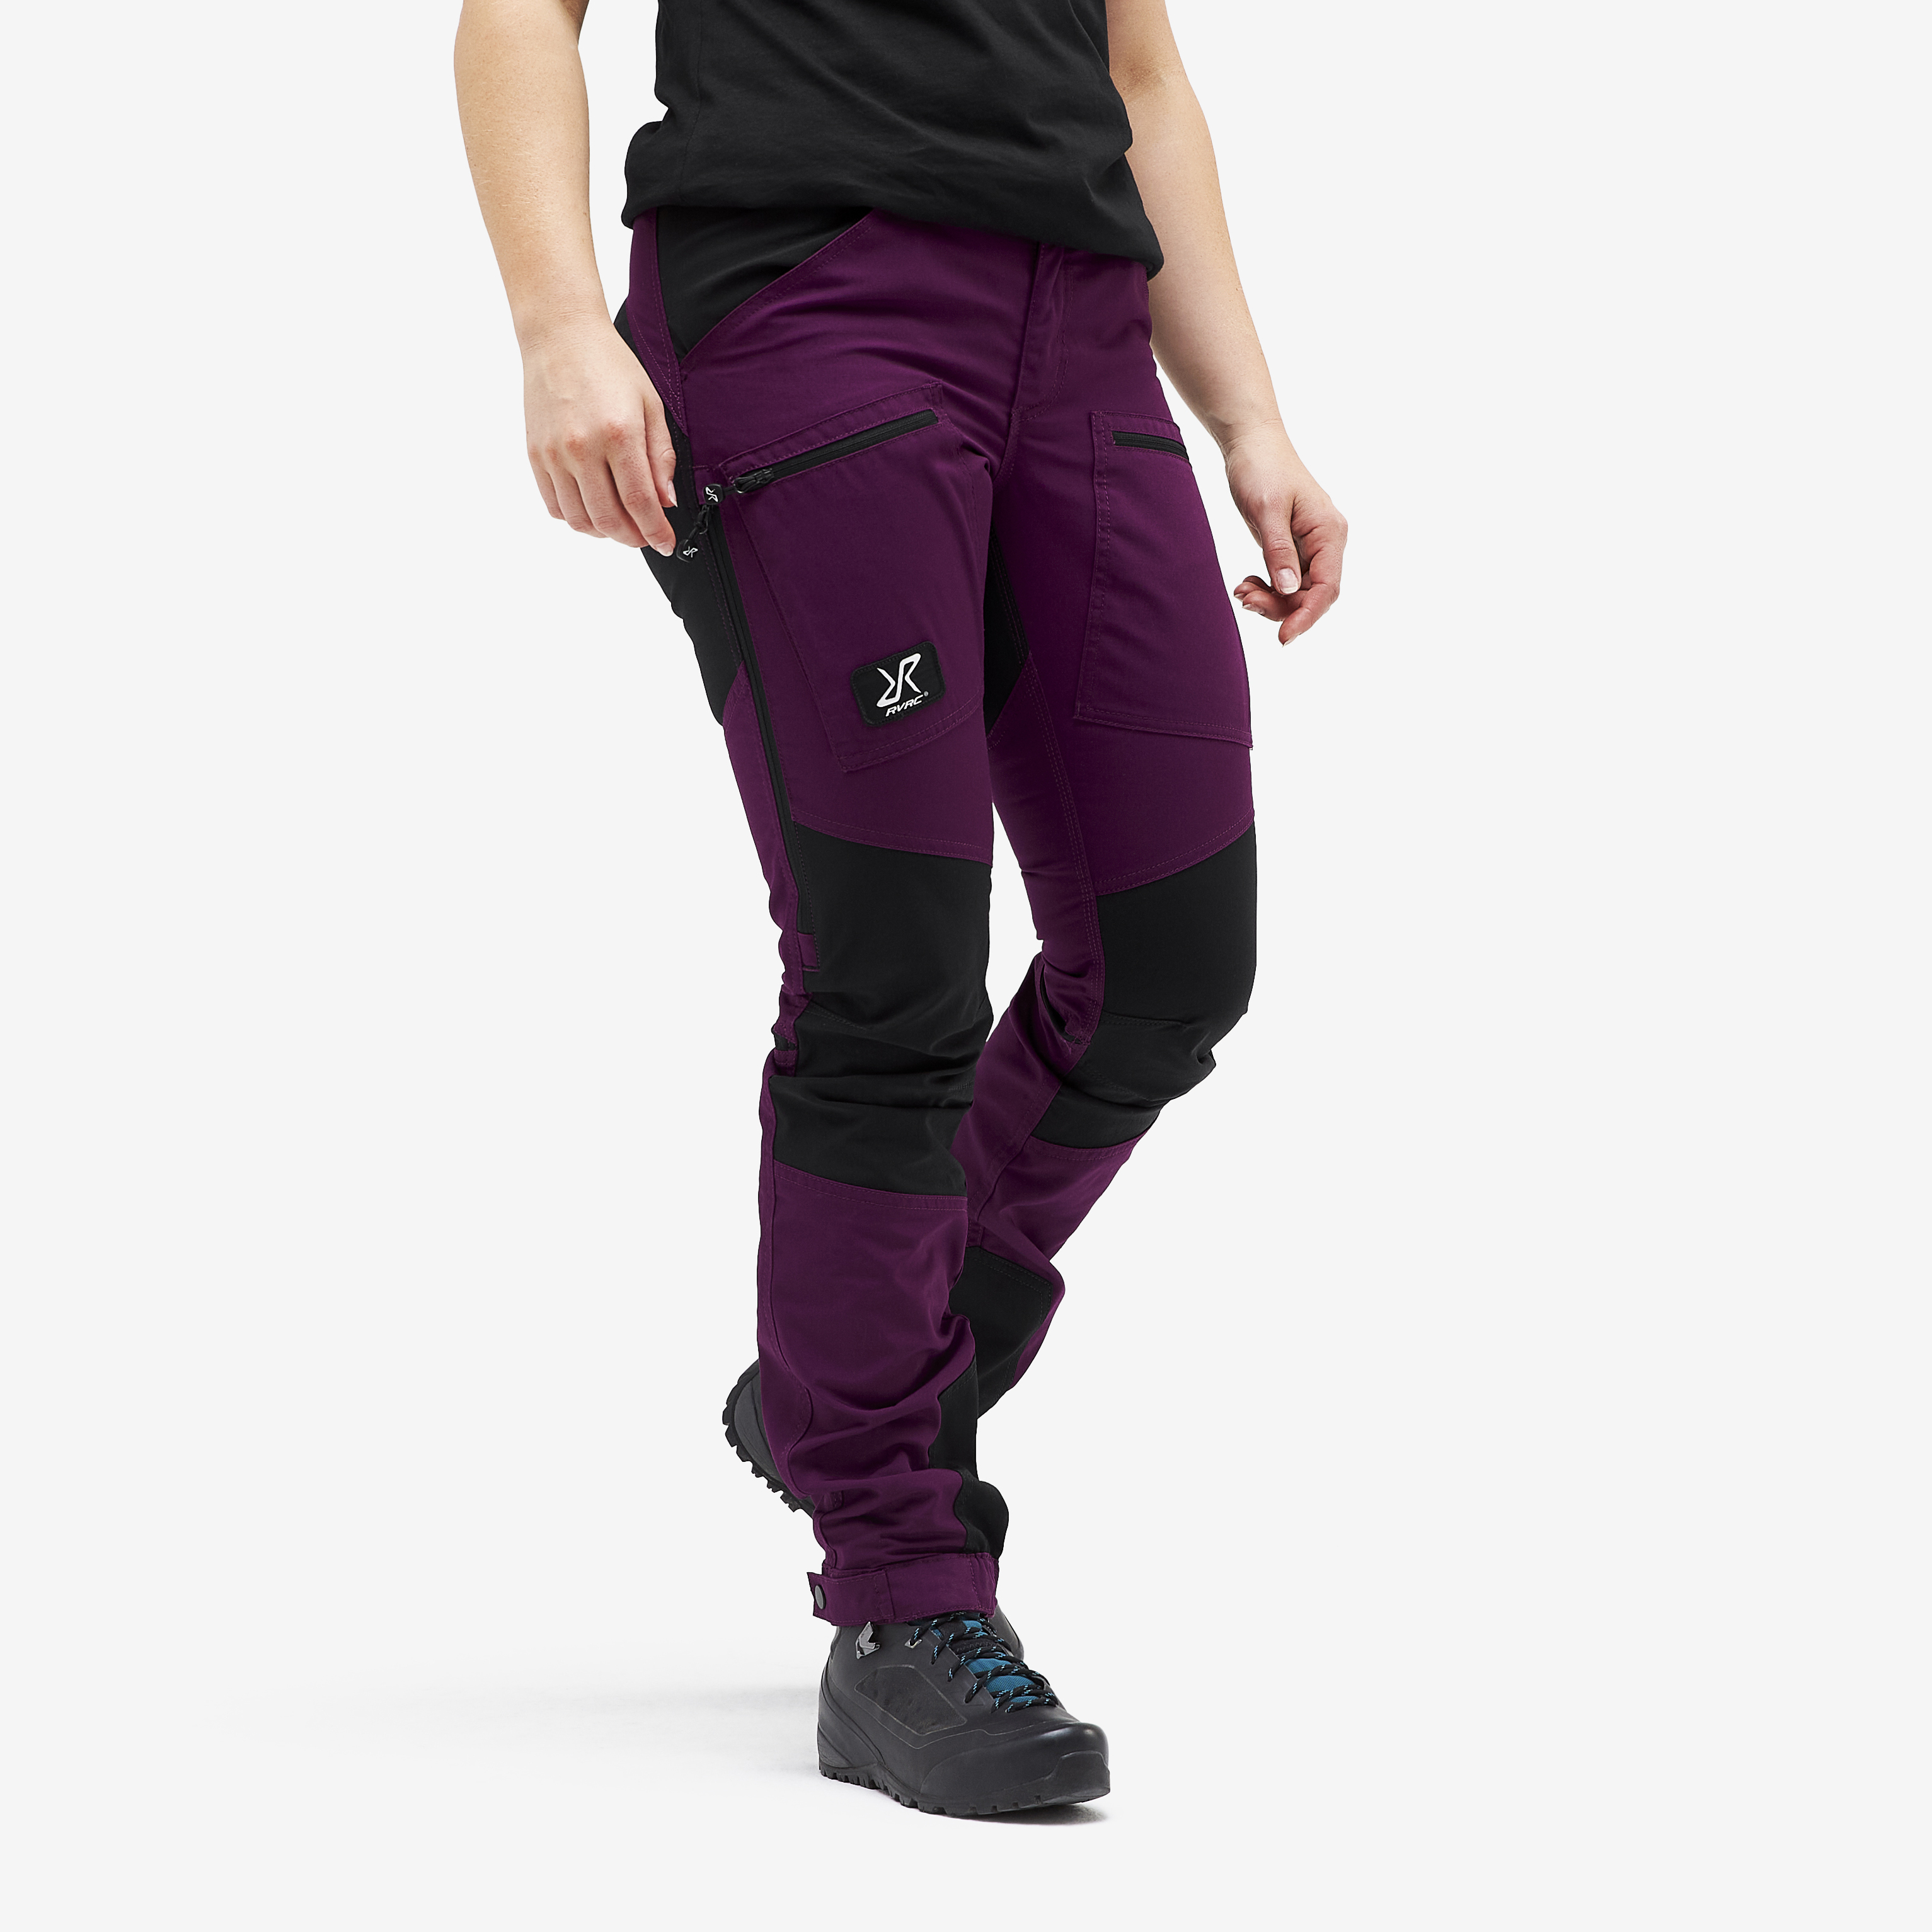 Nordwand Pro hiking trousers for women in purple